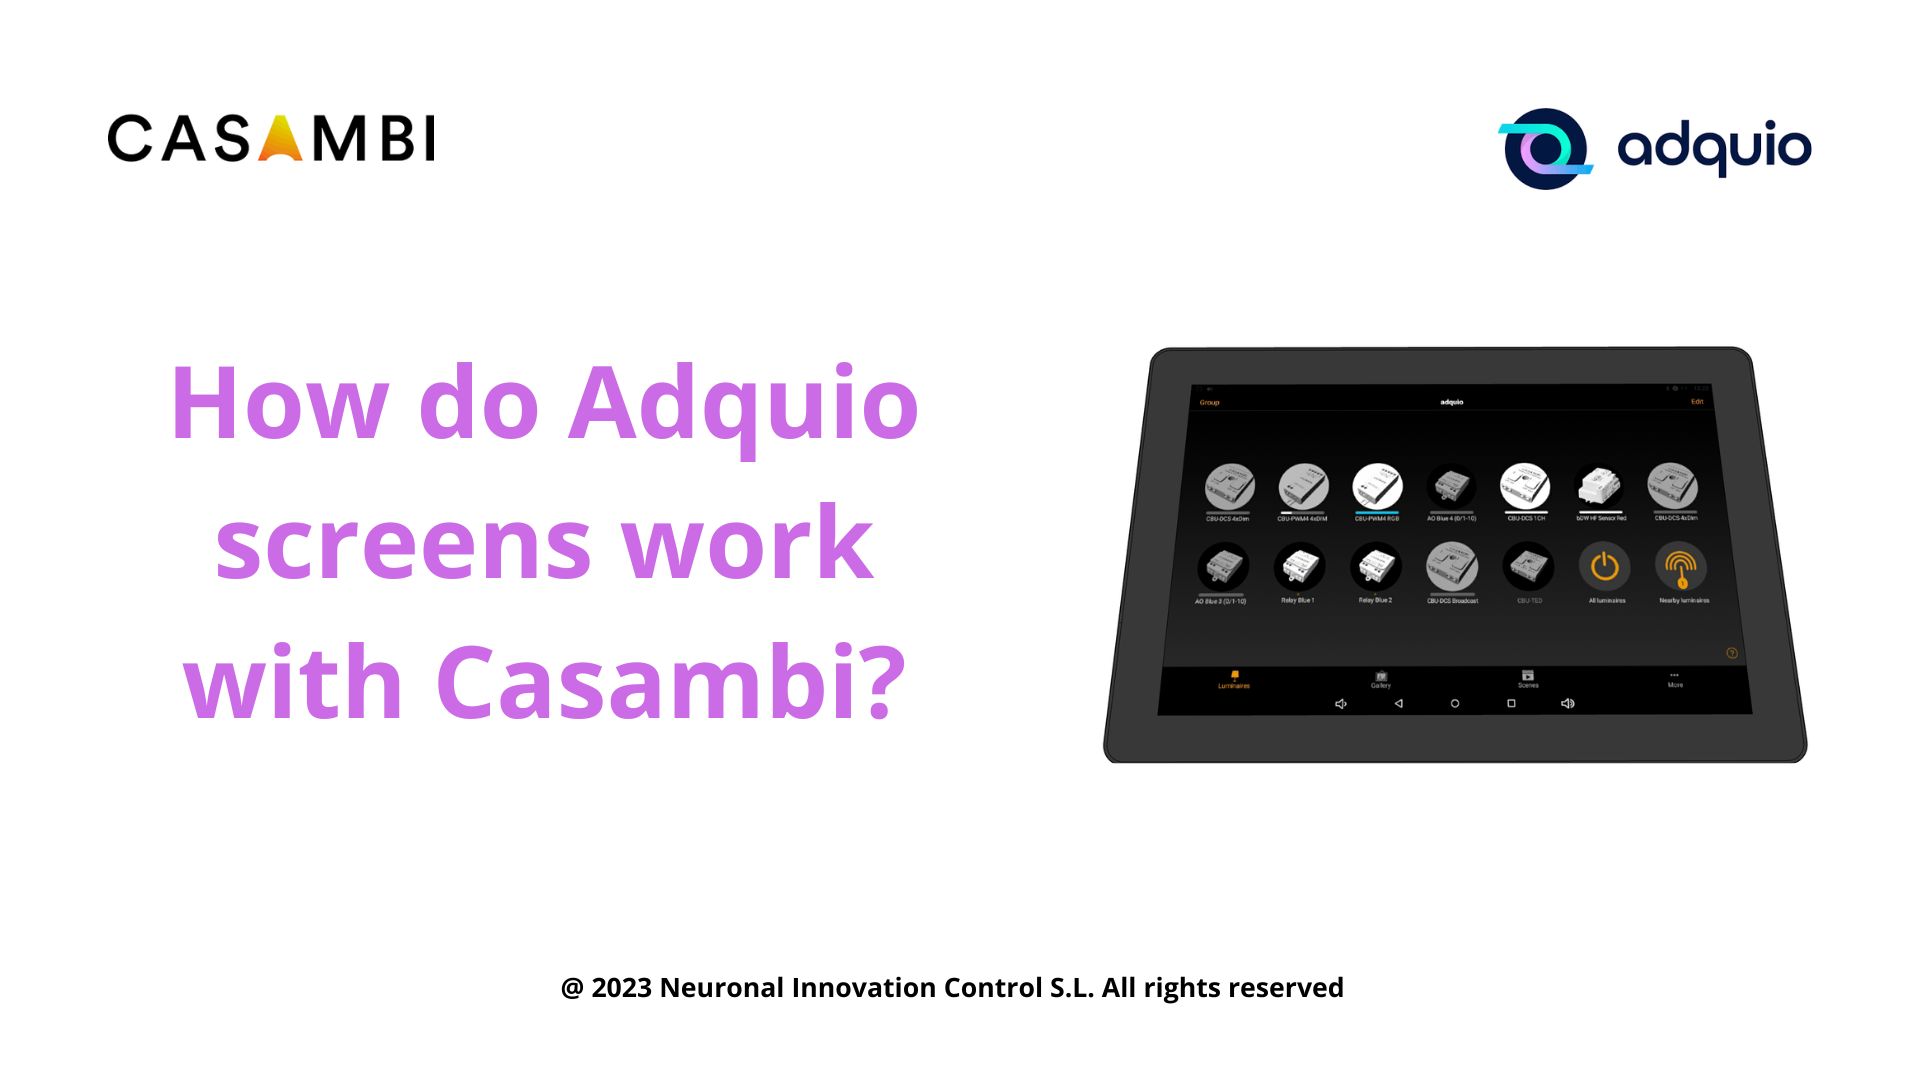 How Adquio helps you in your Casambi facilities